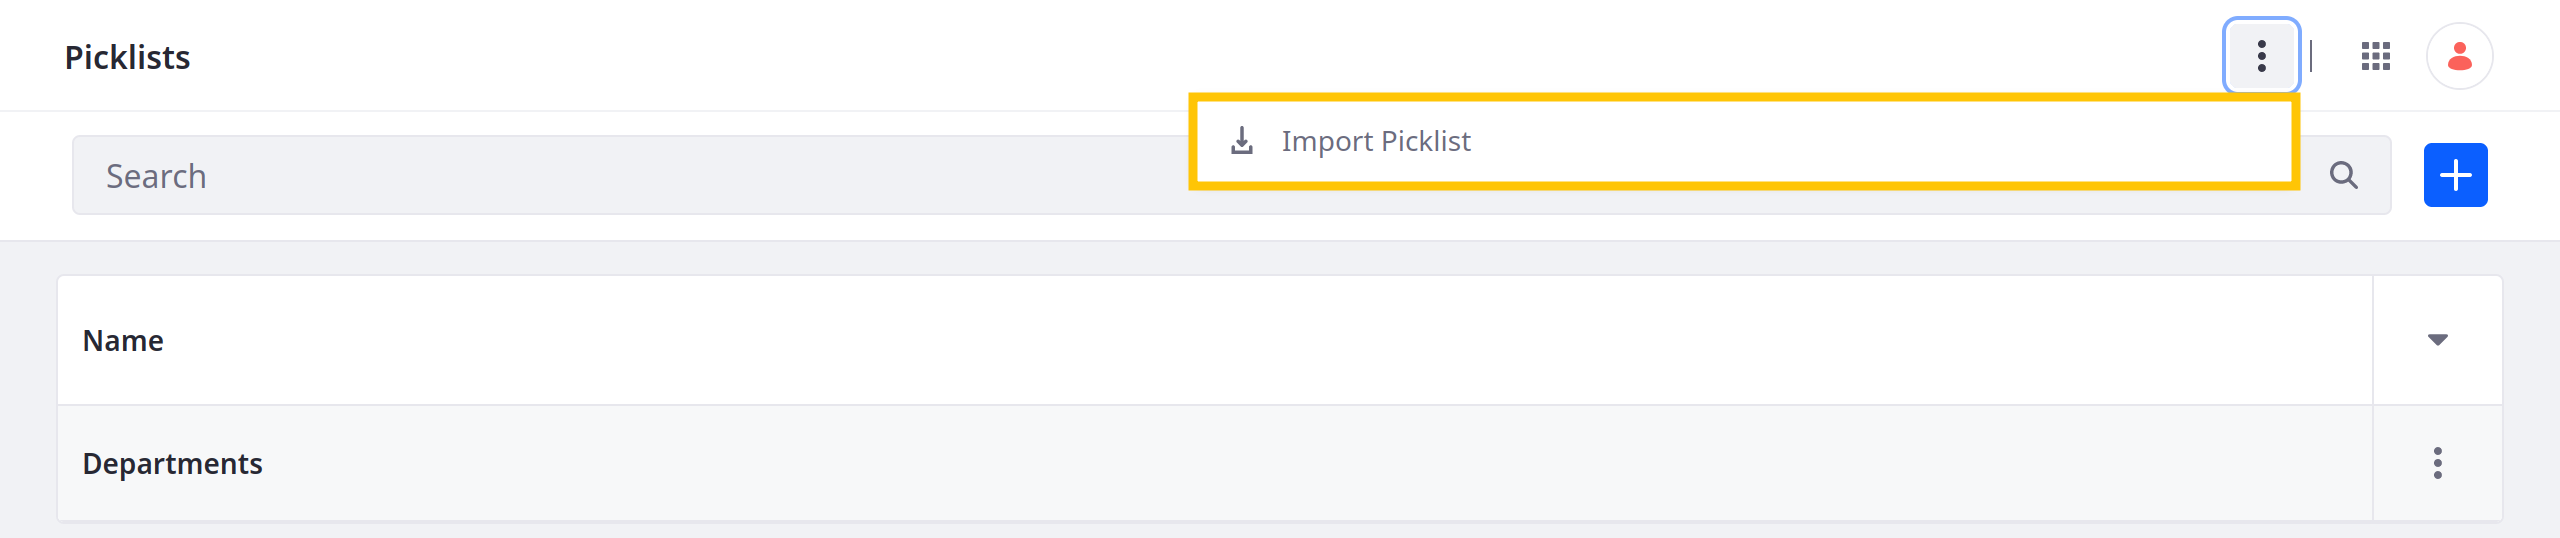 Click the Action button in the Application Bar and select Import Picklist.